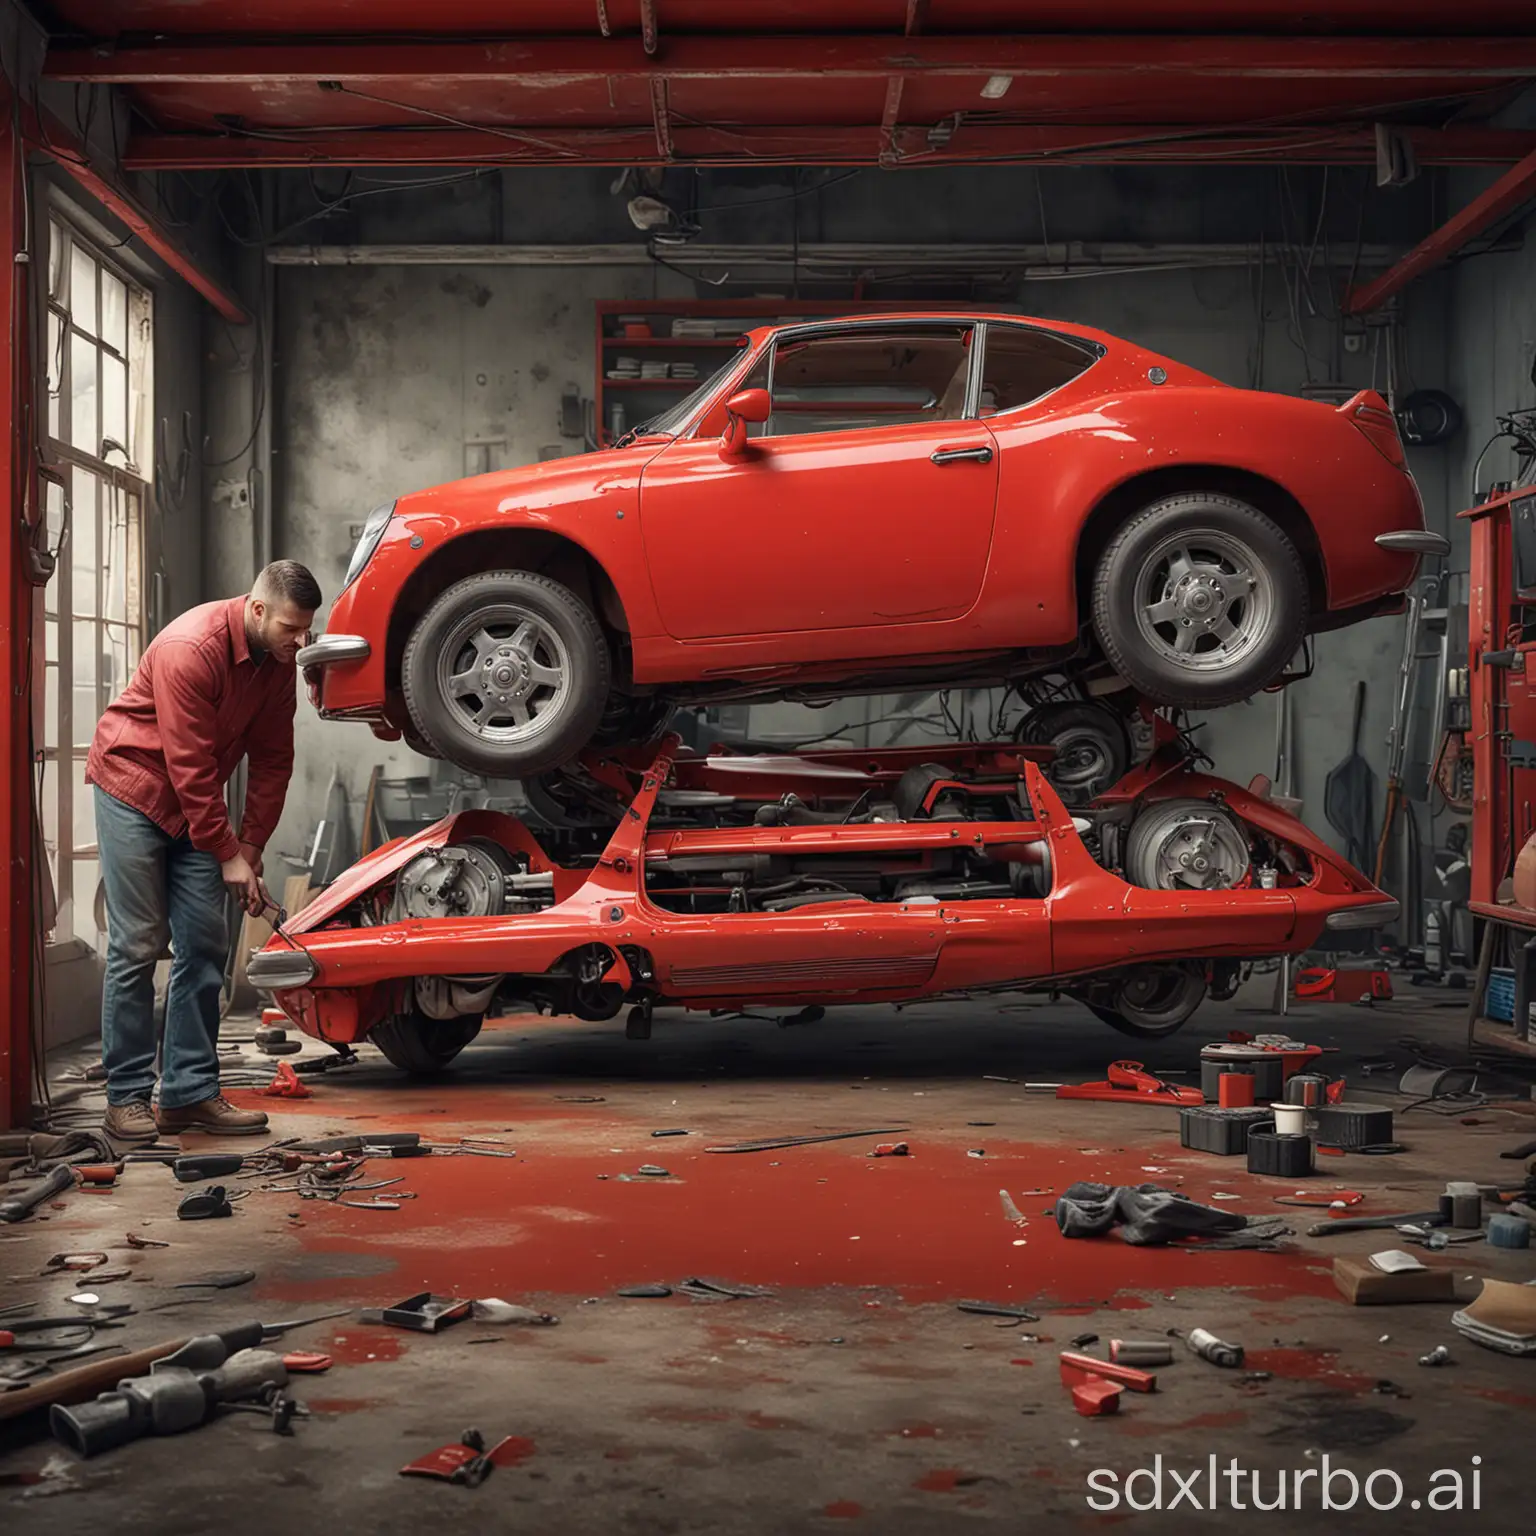 a photorealistic image of a real human repairing a authentic red car. The mechanic is repairing the car from underneath.